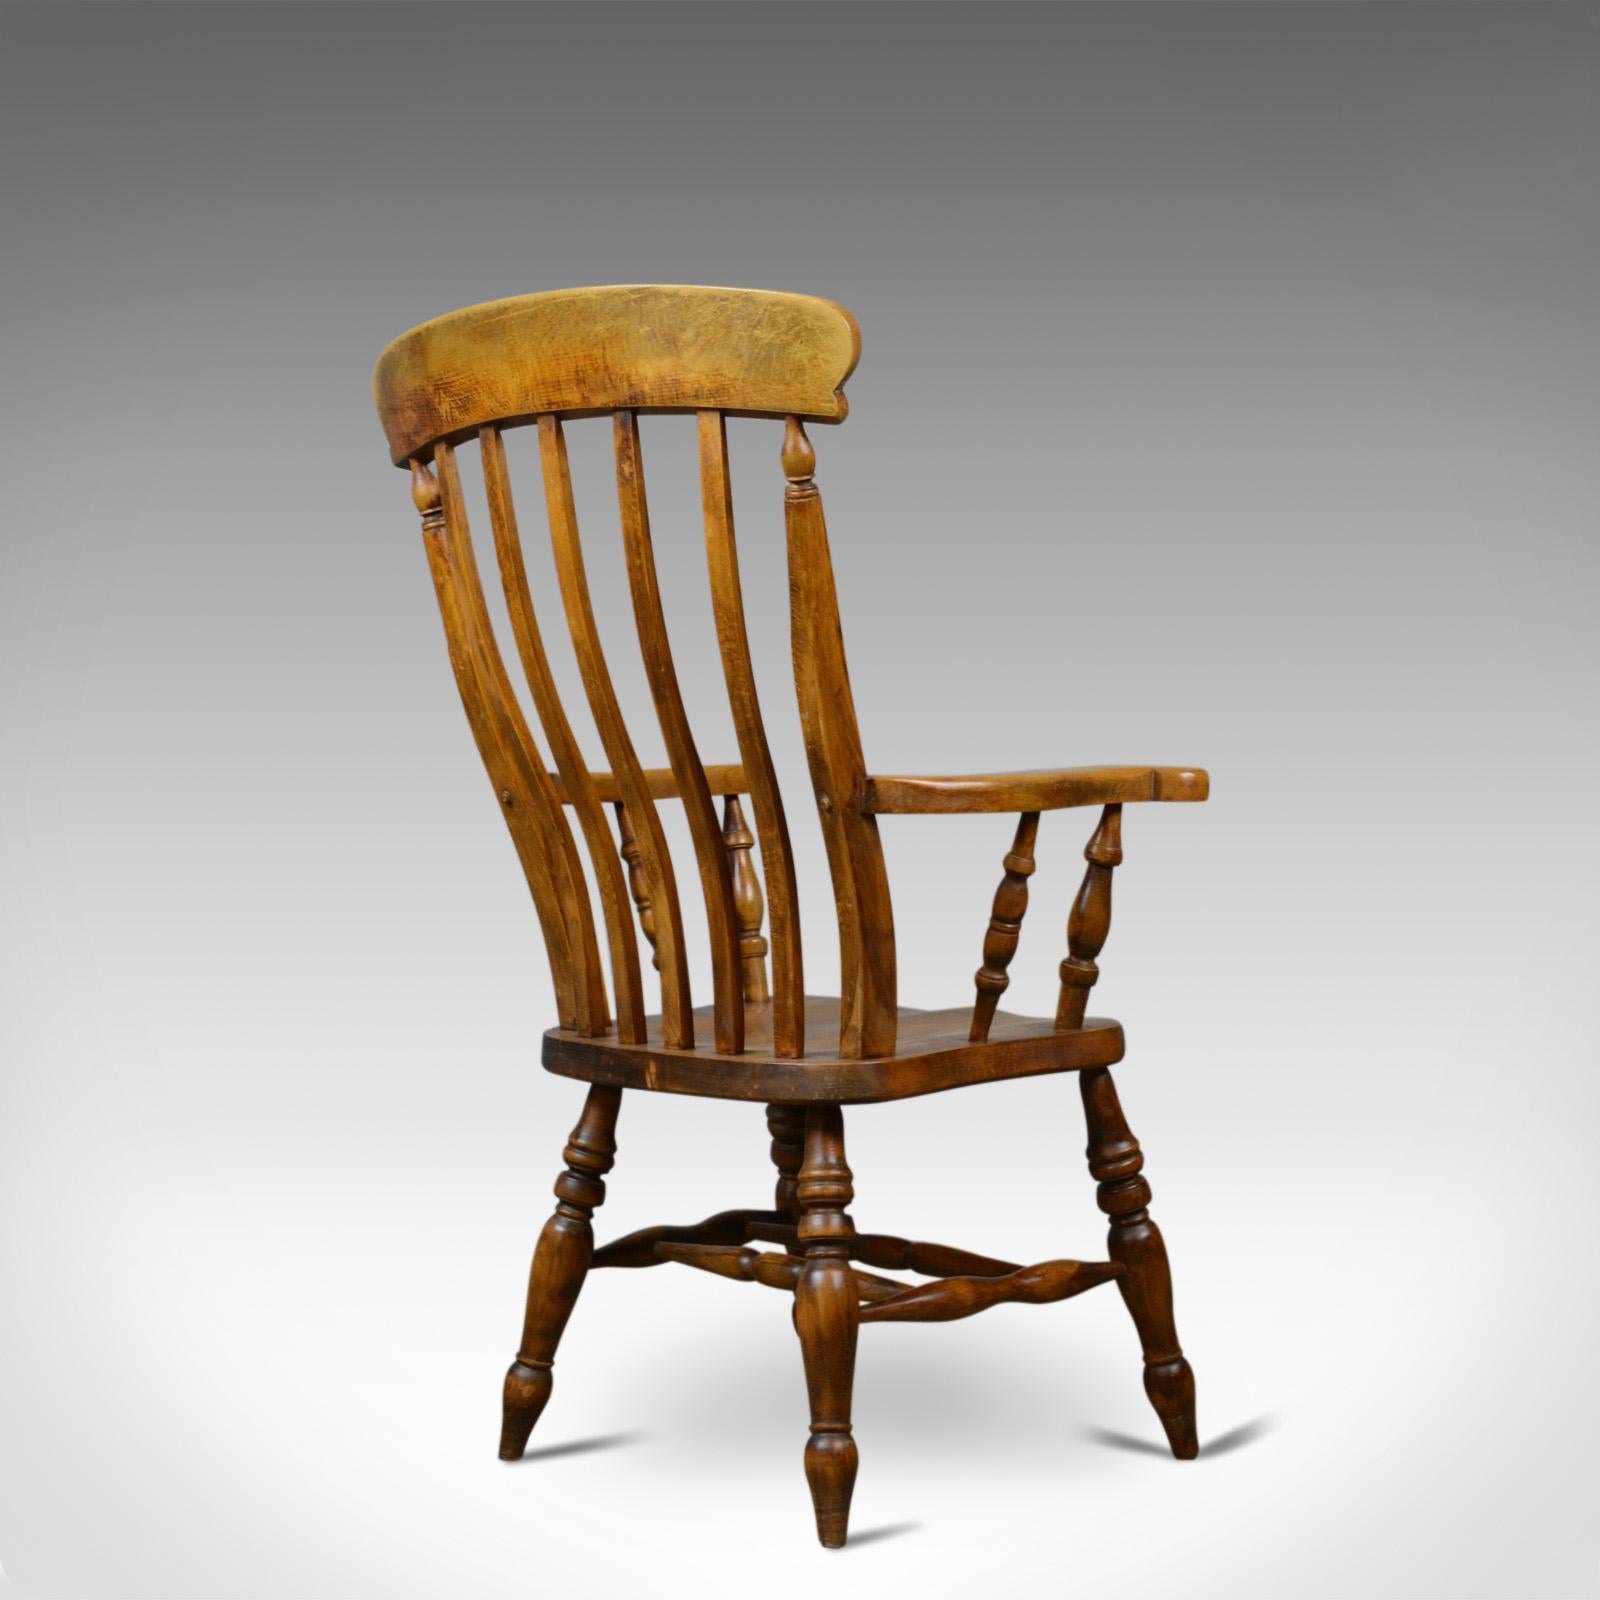 20th Century Antique Elbow Chair, English, Country Kitchen, Windsor Armchair